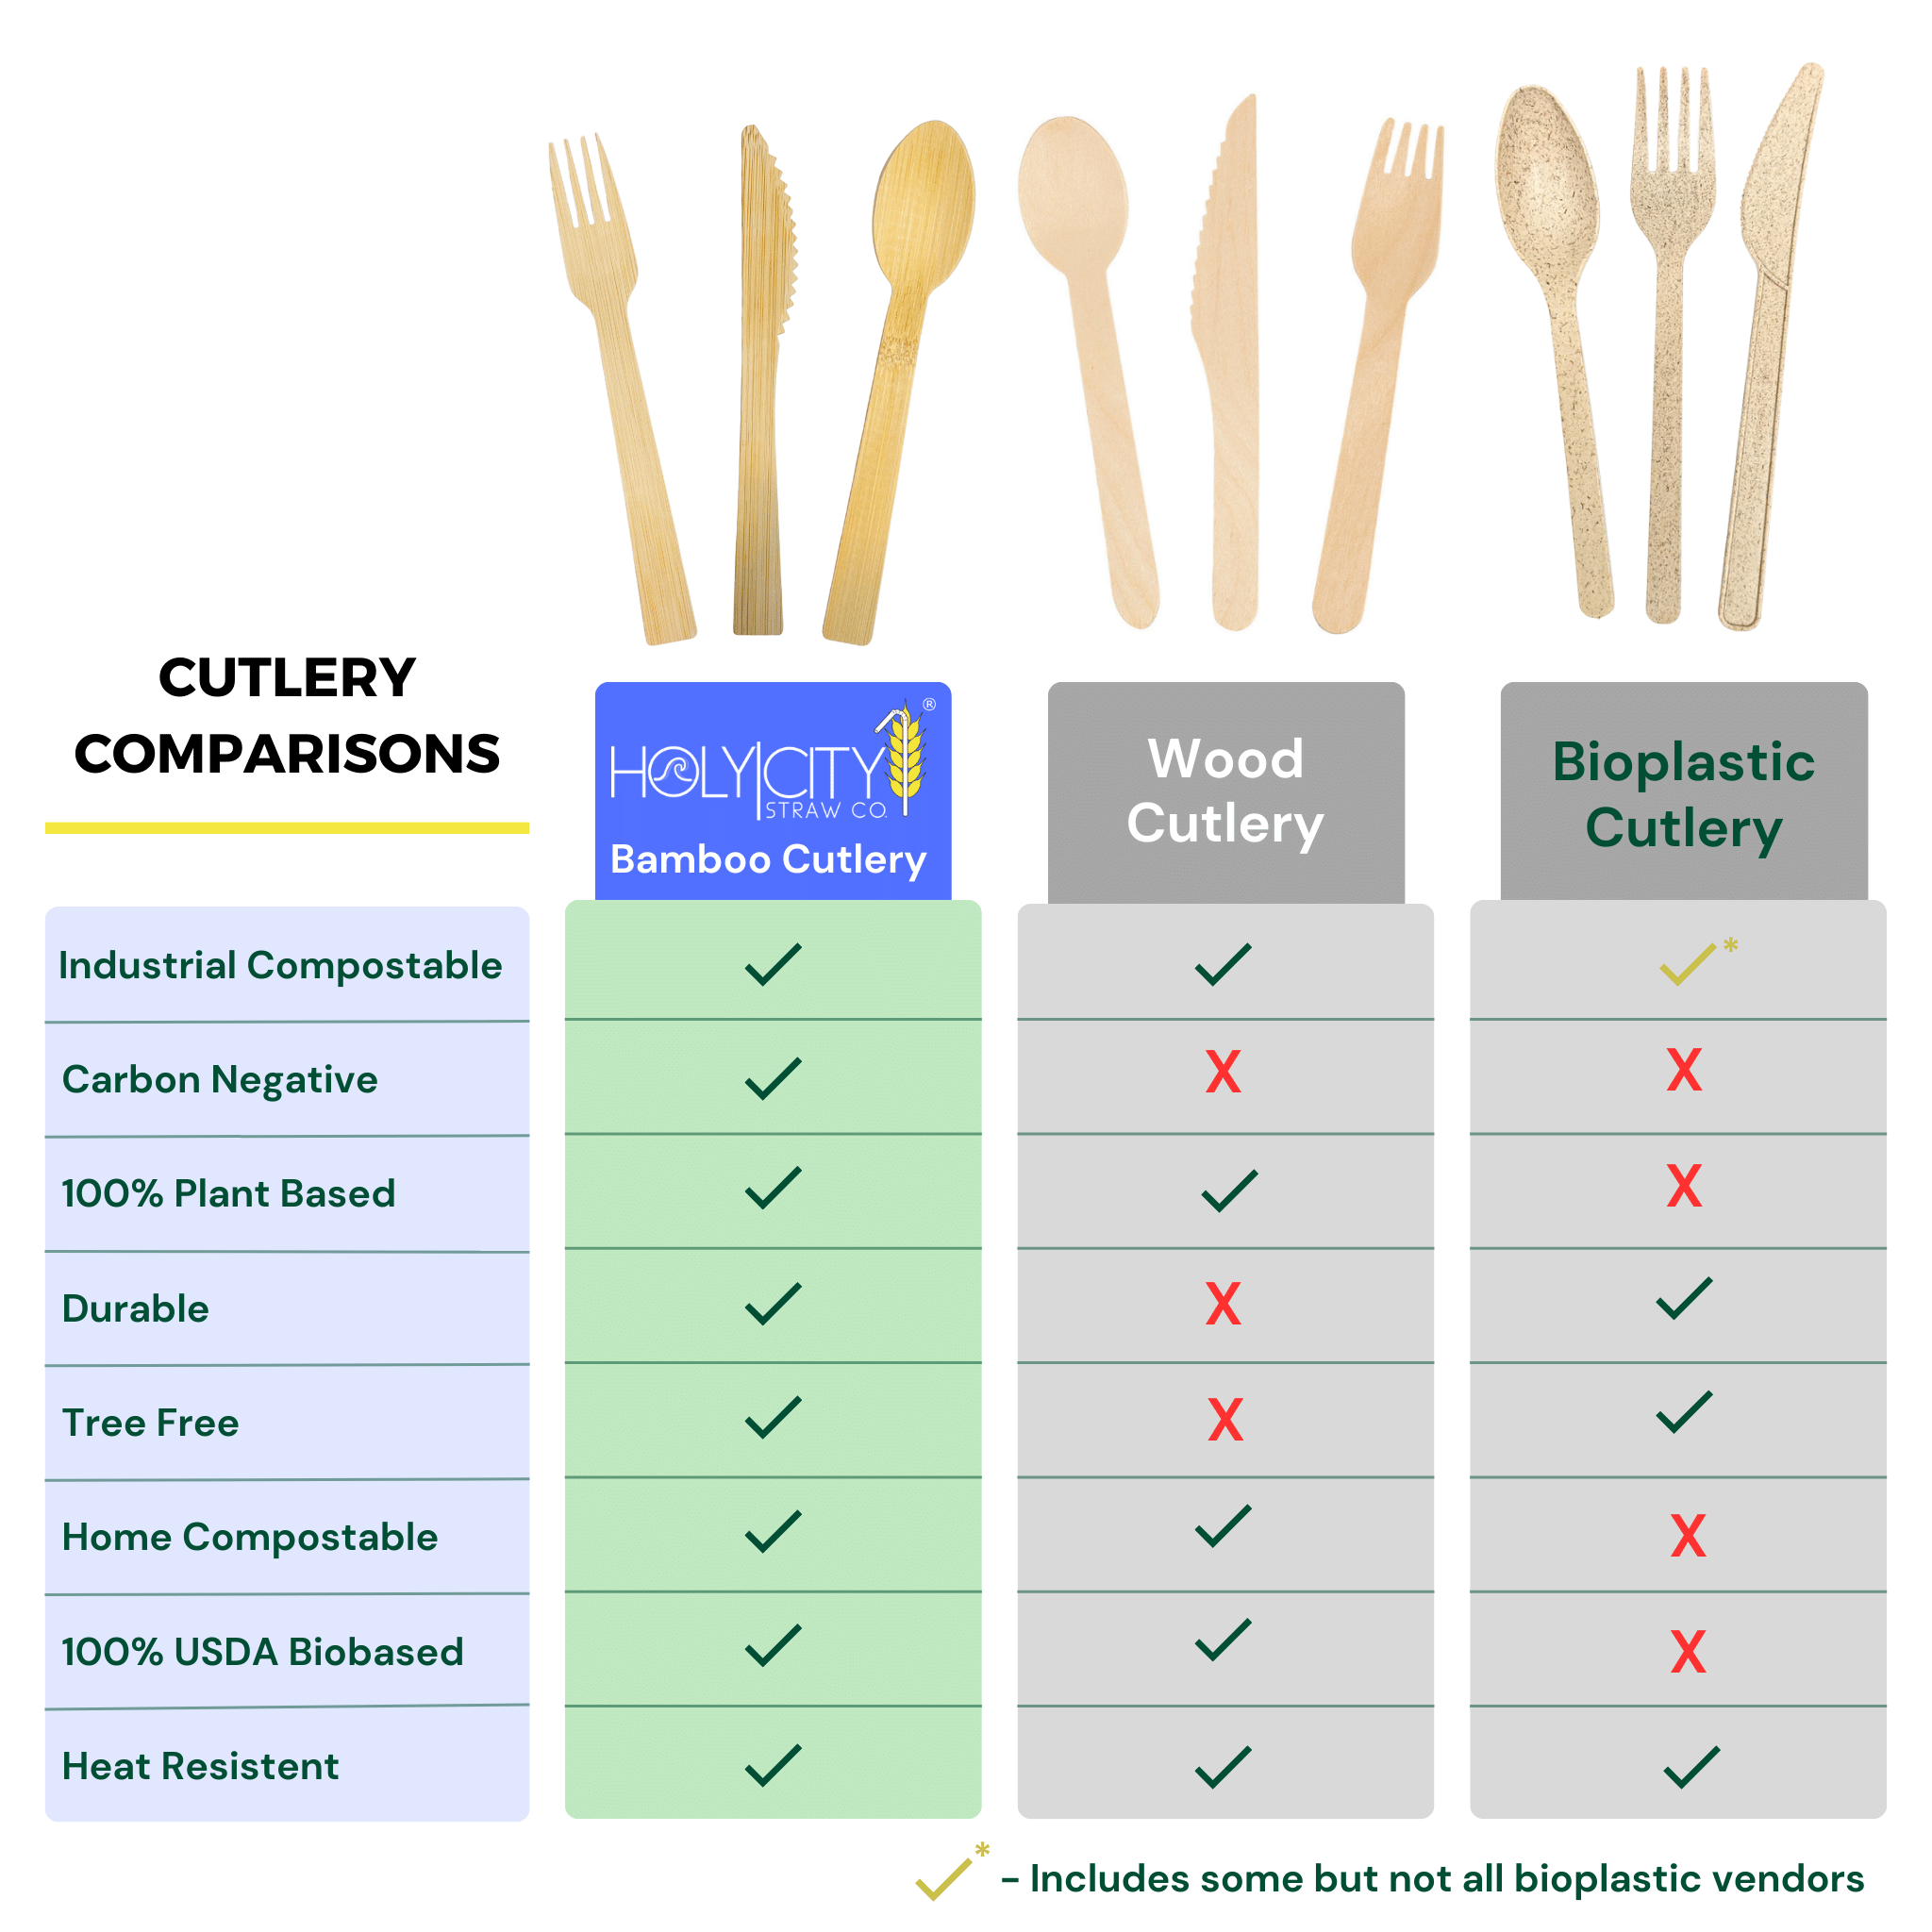 Comparison chart showcasing Holy City Straw Co. bamboo cutlery benefits against wood and bioplastic alternatives, highlighting industrial compostability, carbon negativity, durability